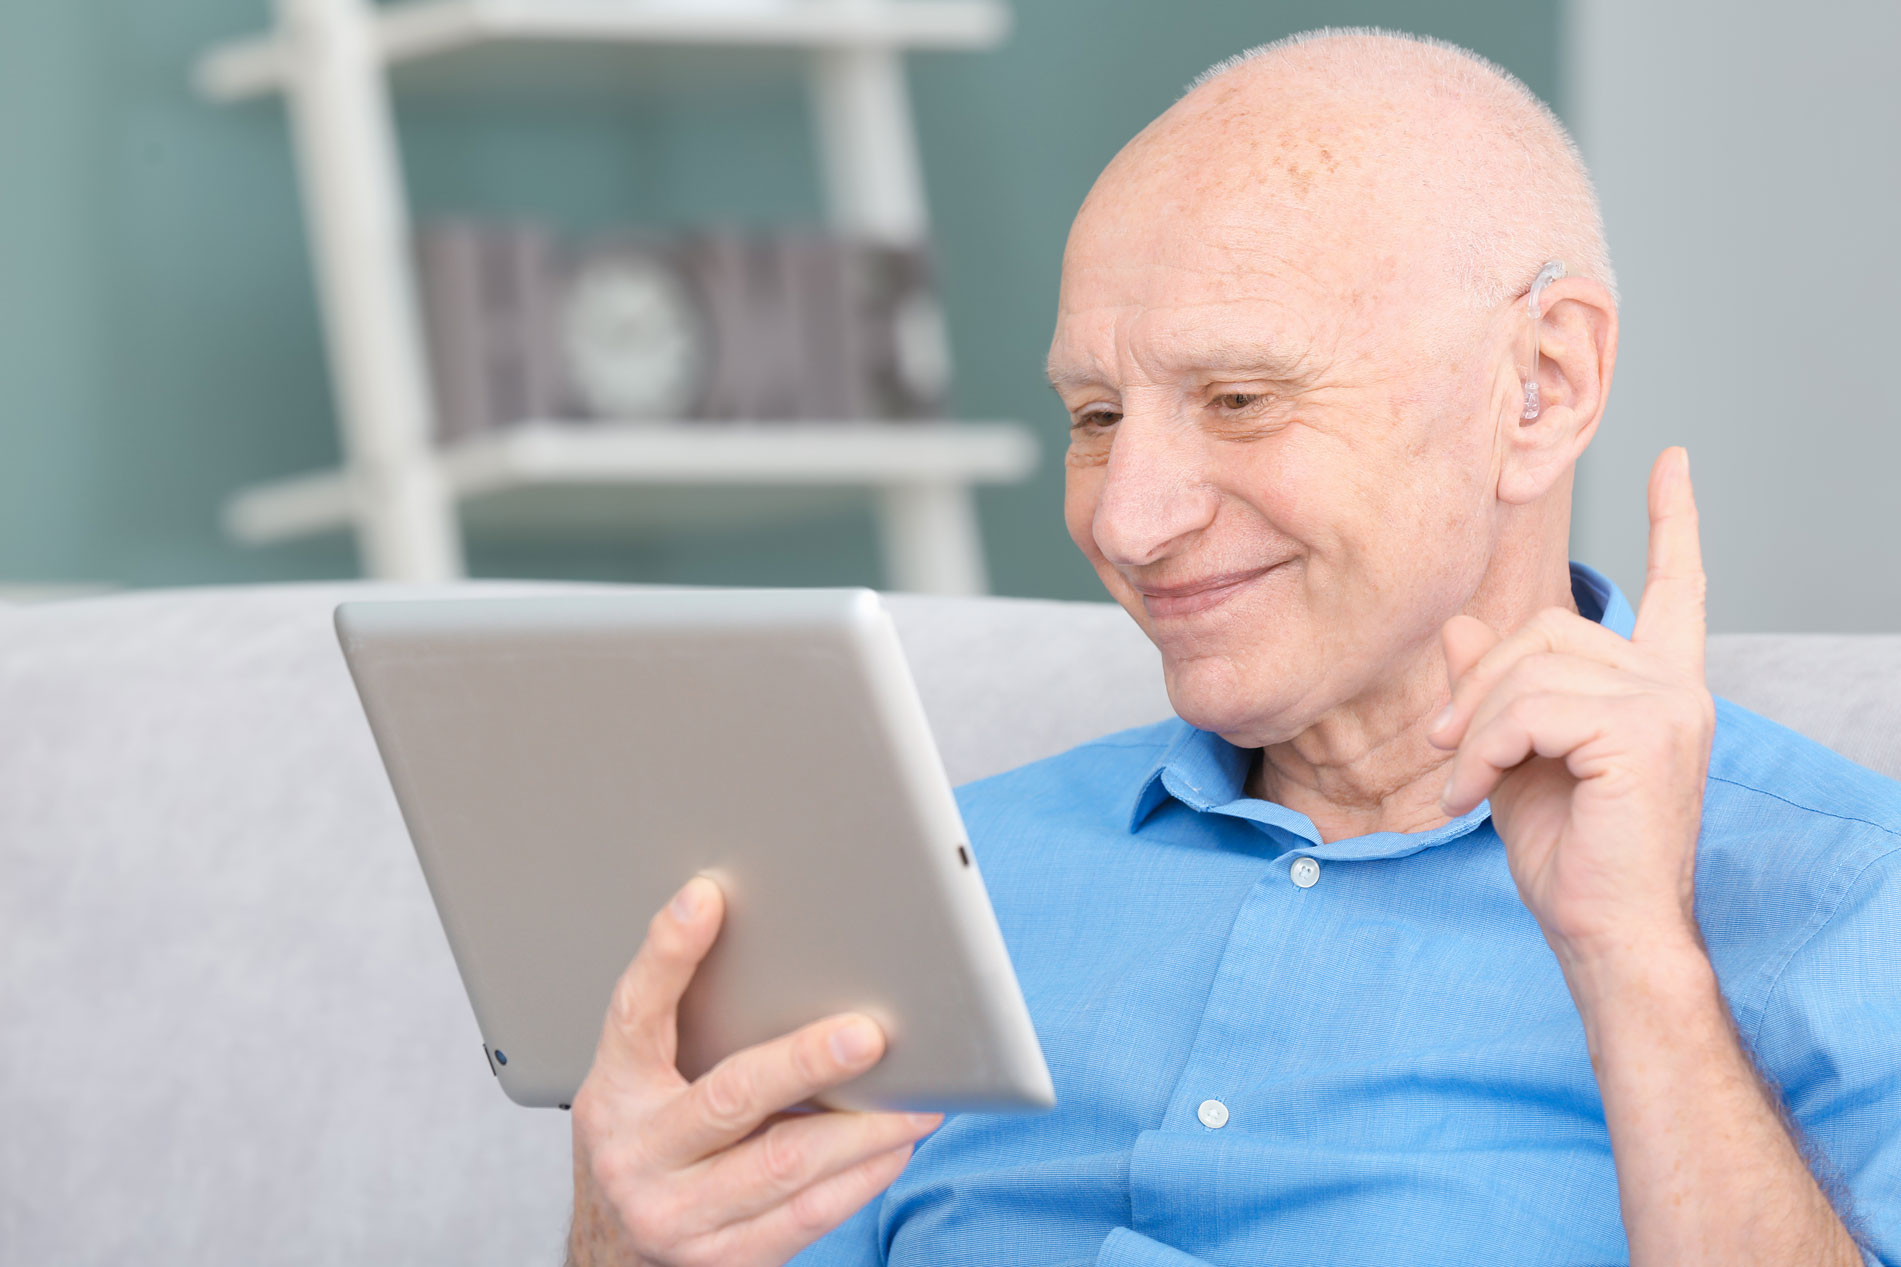 Man with hearing aid uses tablet